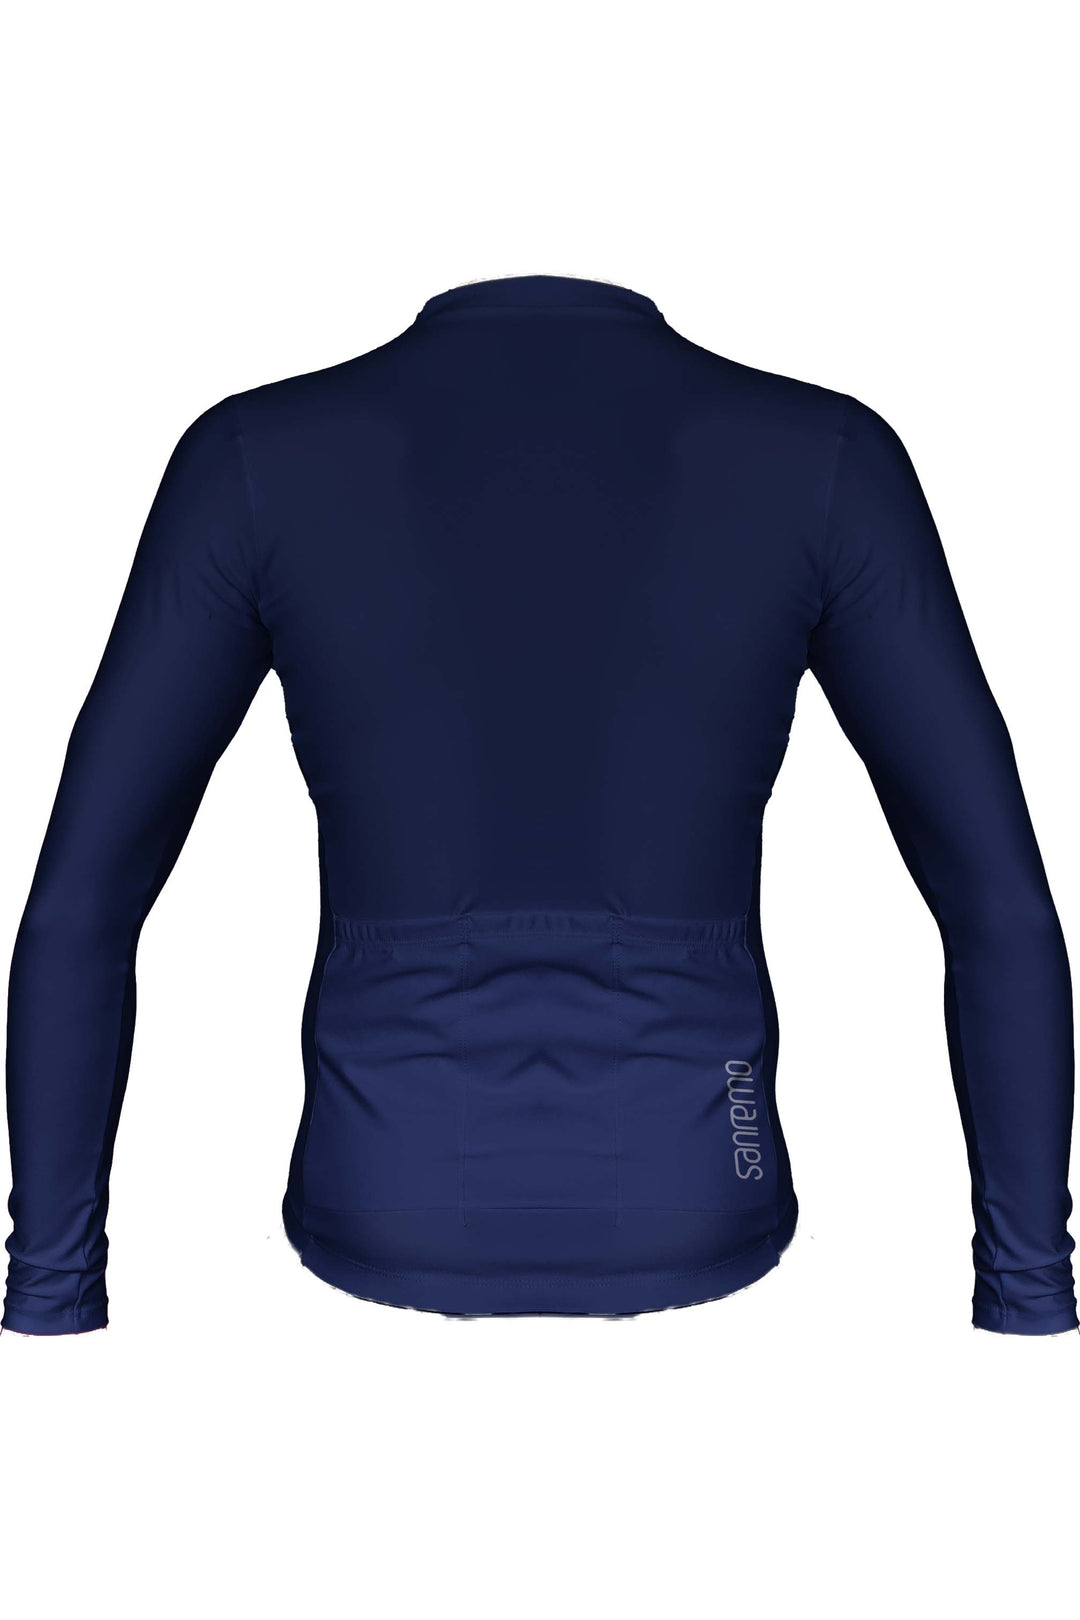 Jersey Corsa Thermal Navy - Hombre